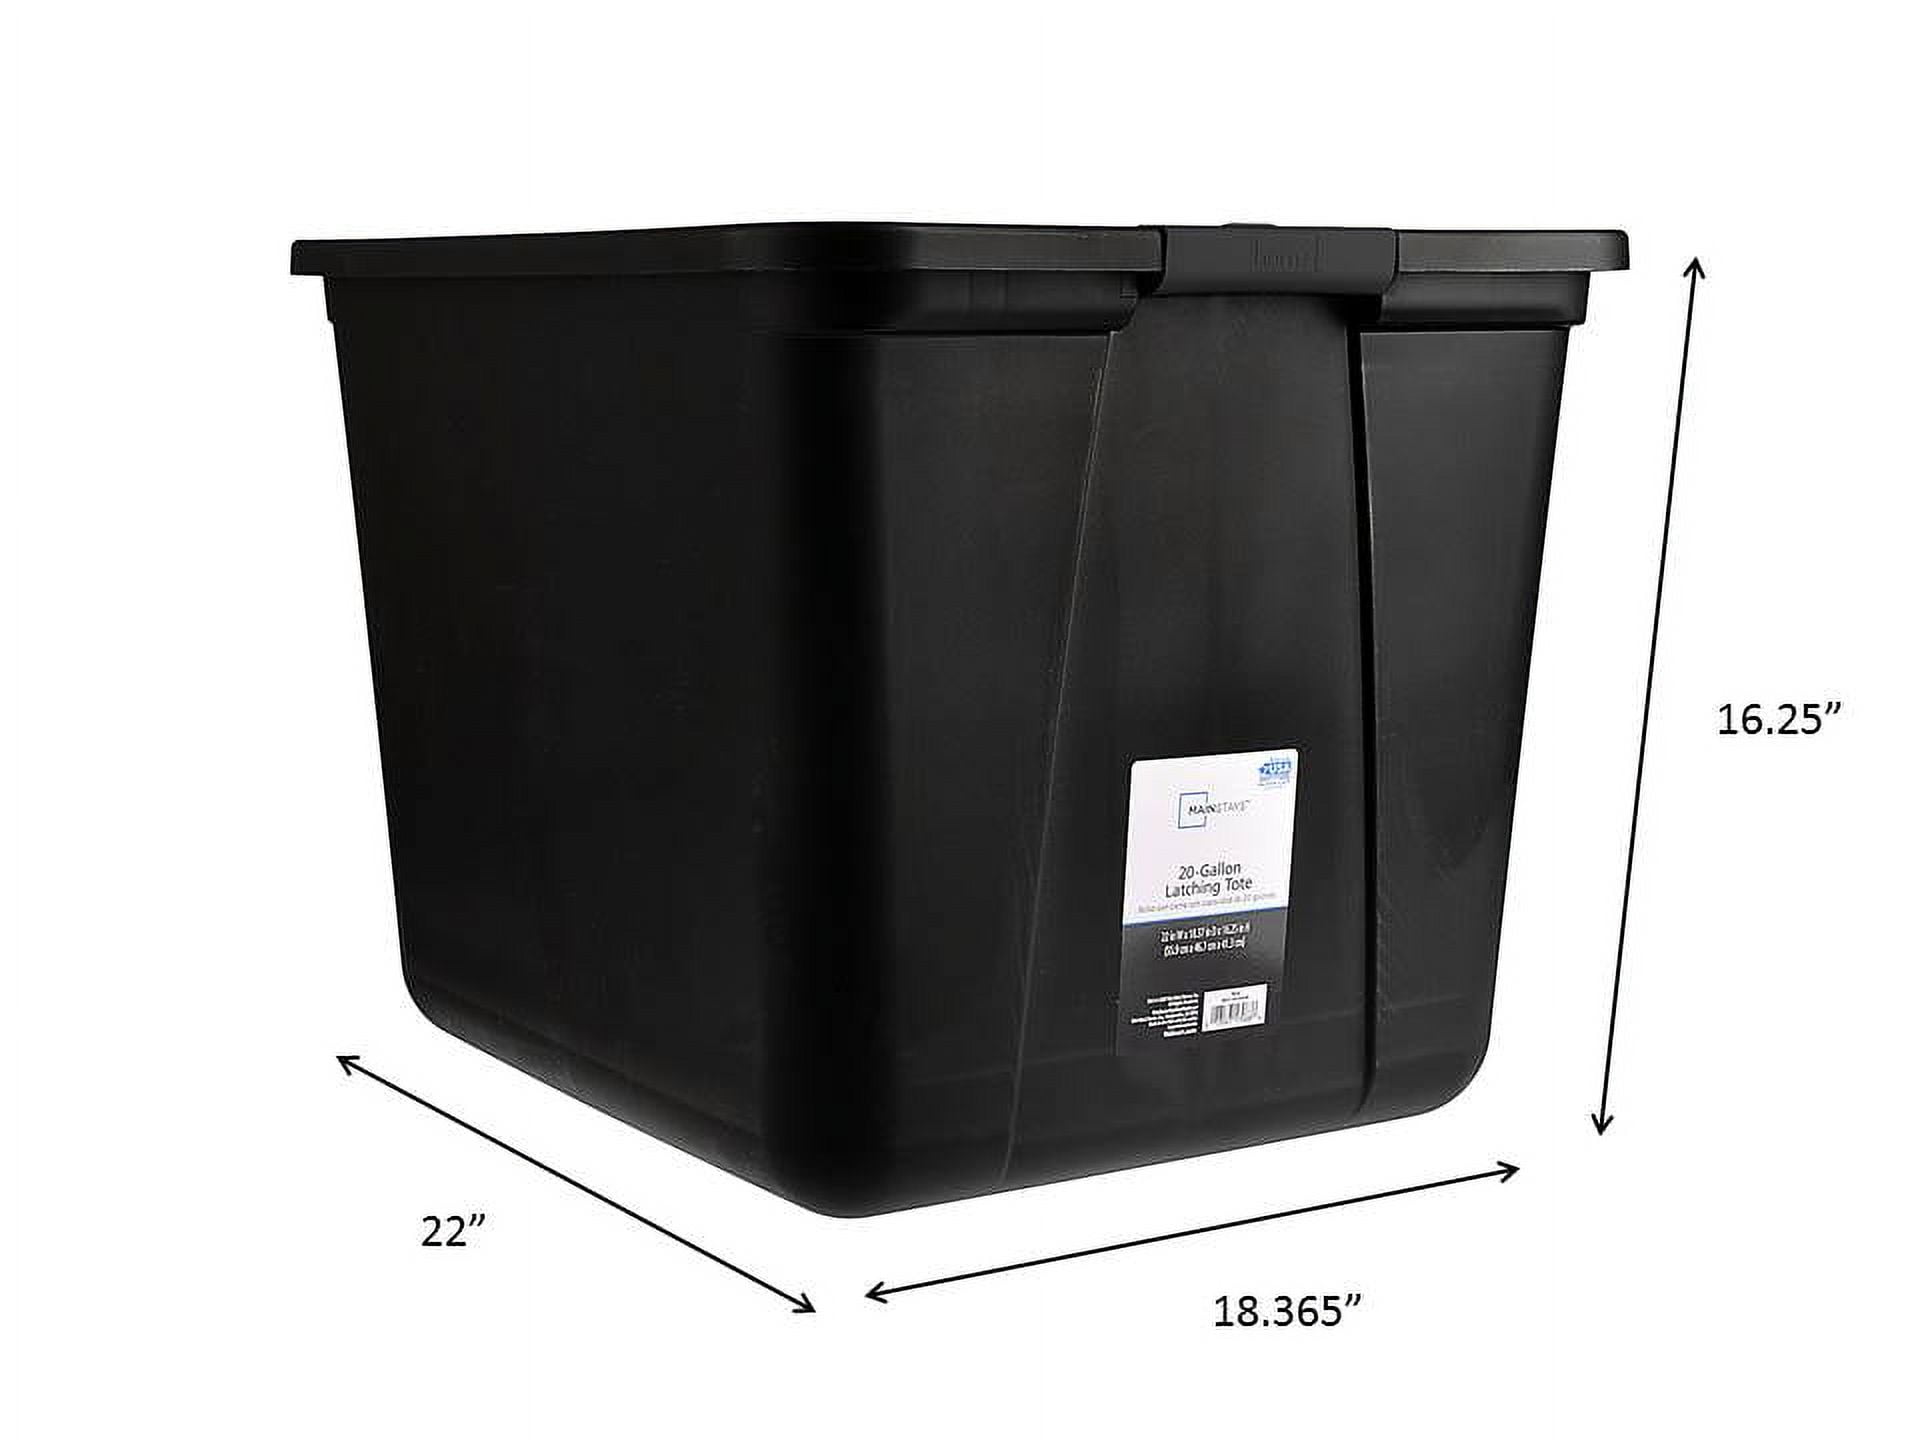 20 Gallon Mixing Container